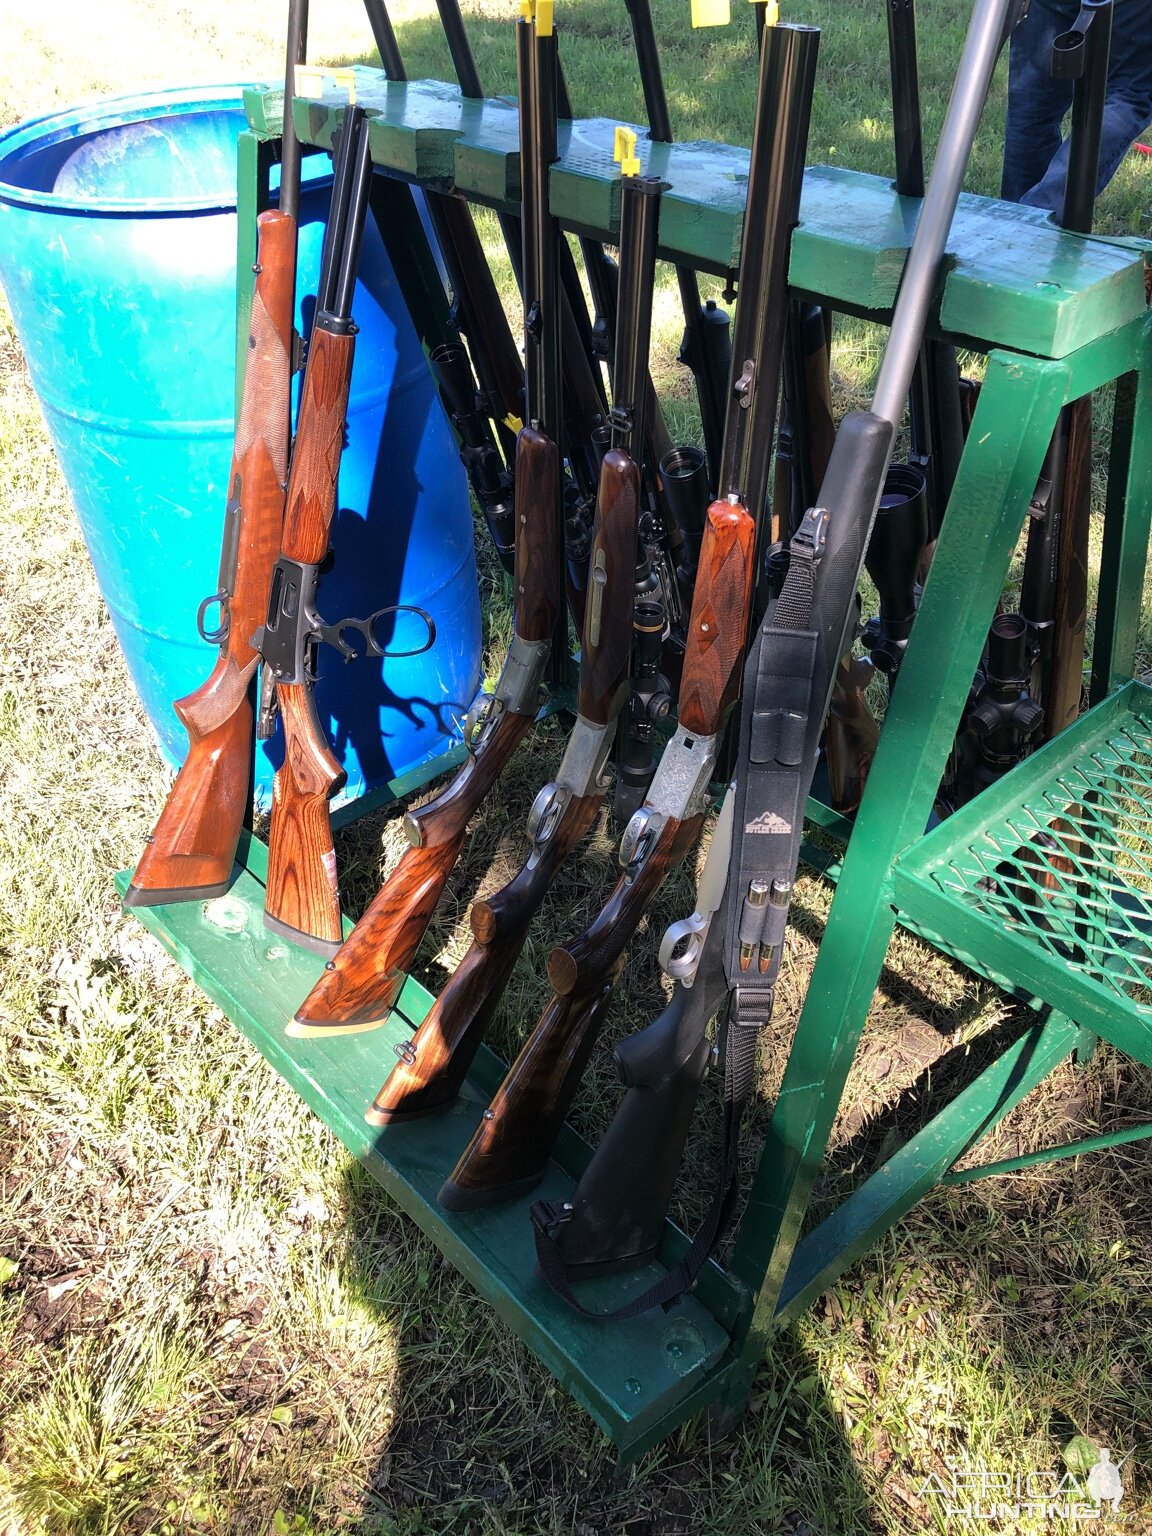 Some of the rifles being used